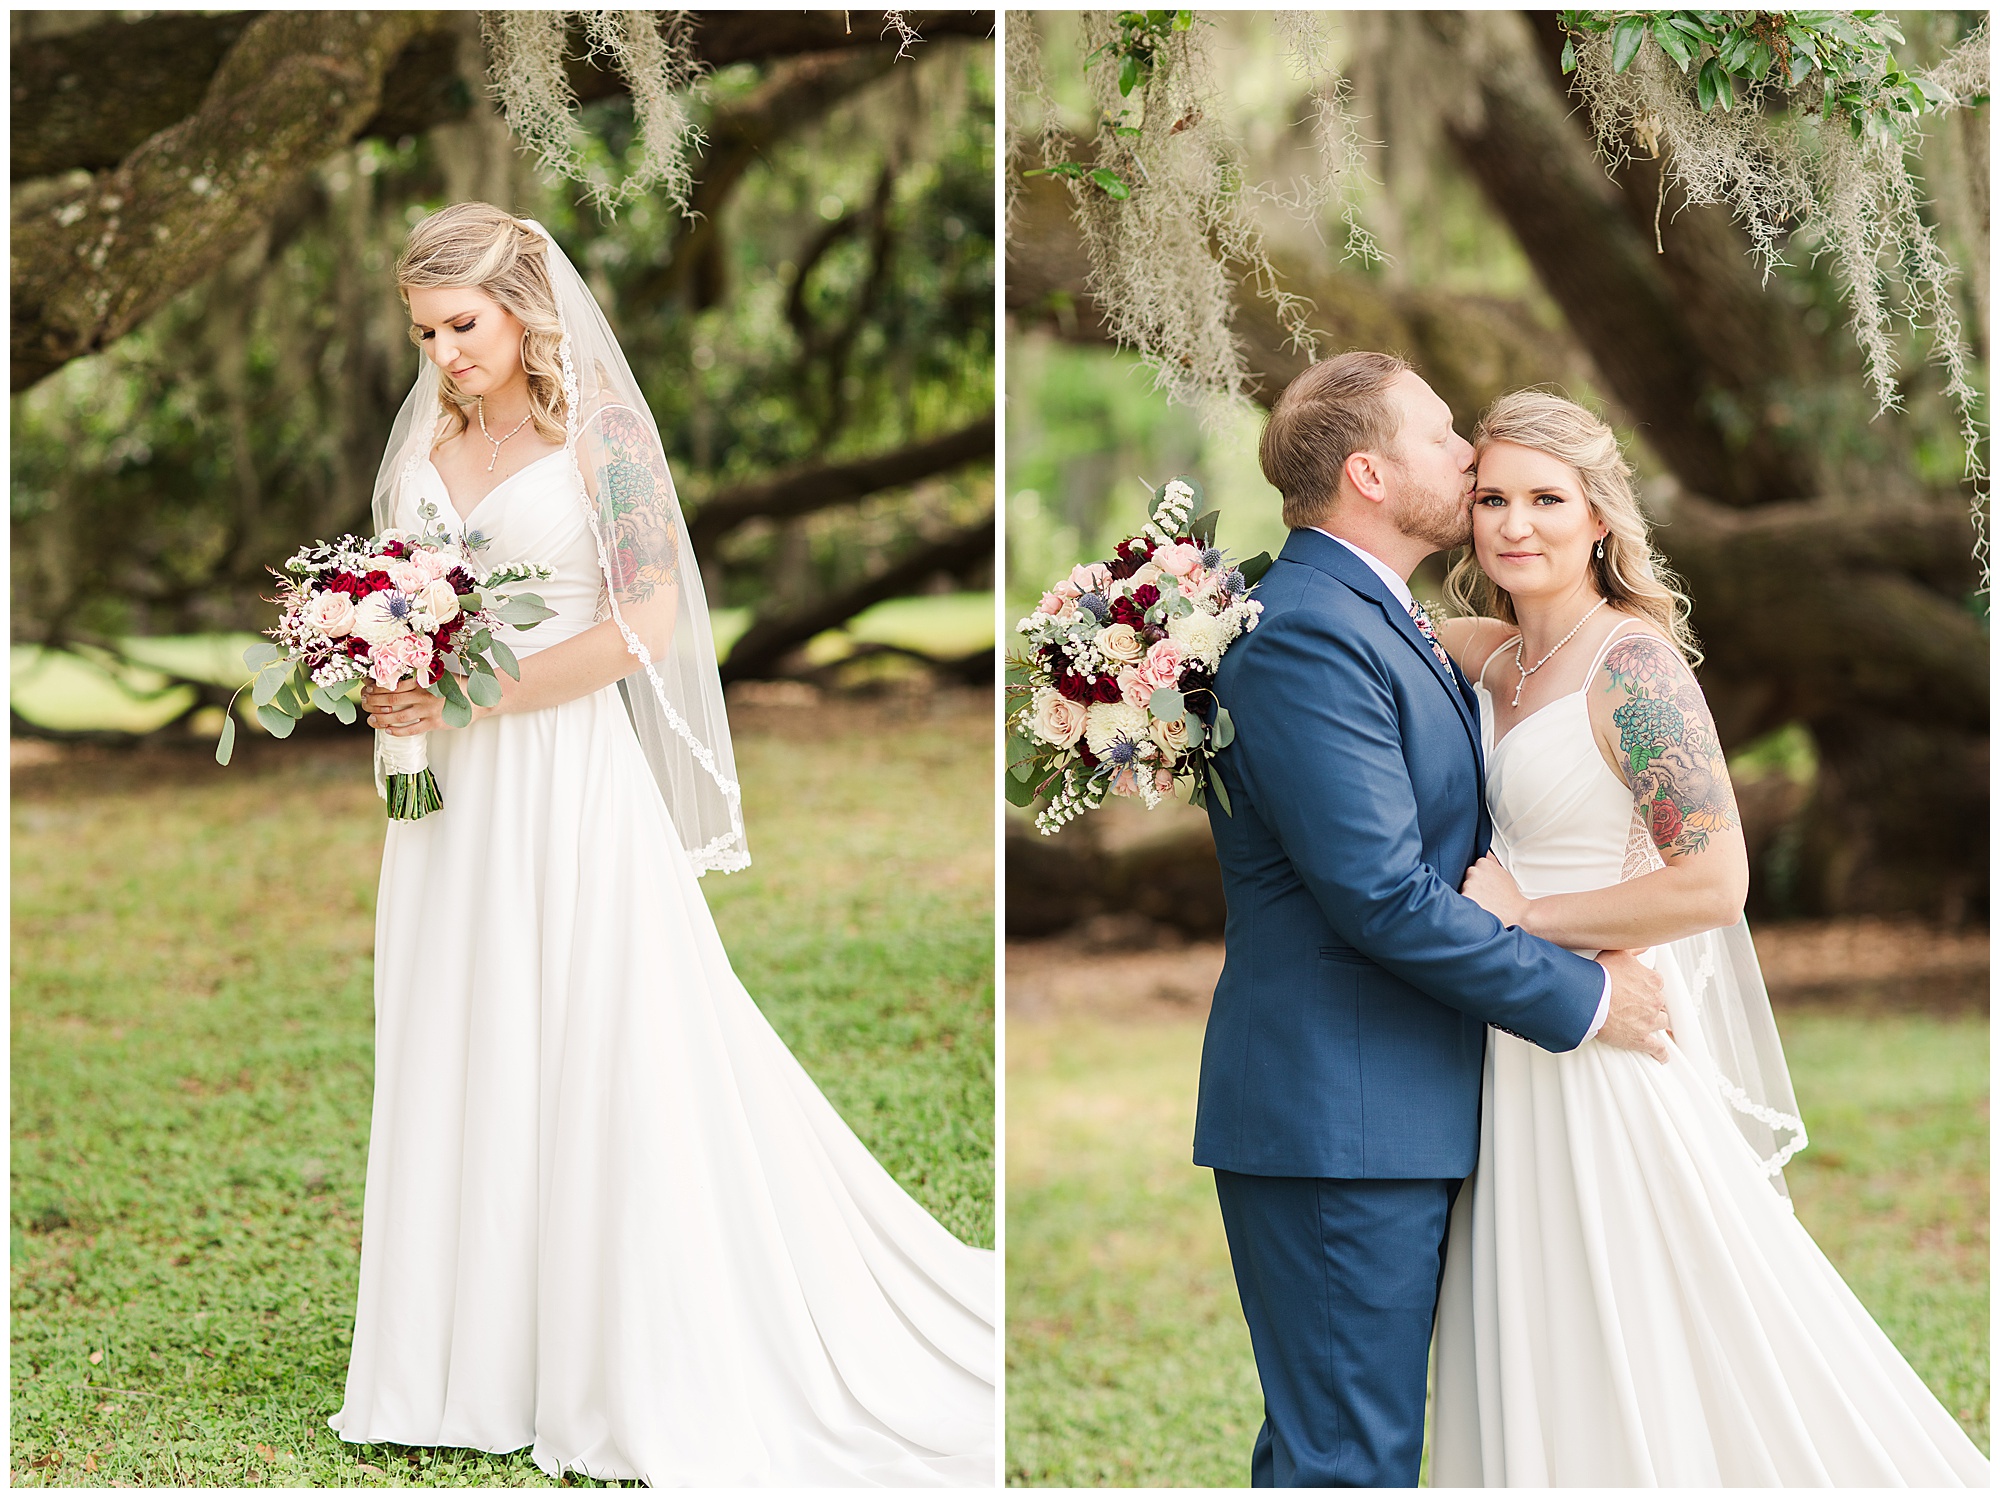 Molly & Steven, Red Gate Farms wedding, Kelley Stinson Photography, Savannah, Georgia, red and pink bouquet